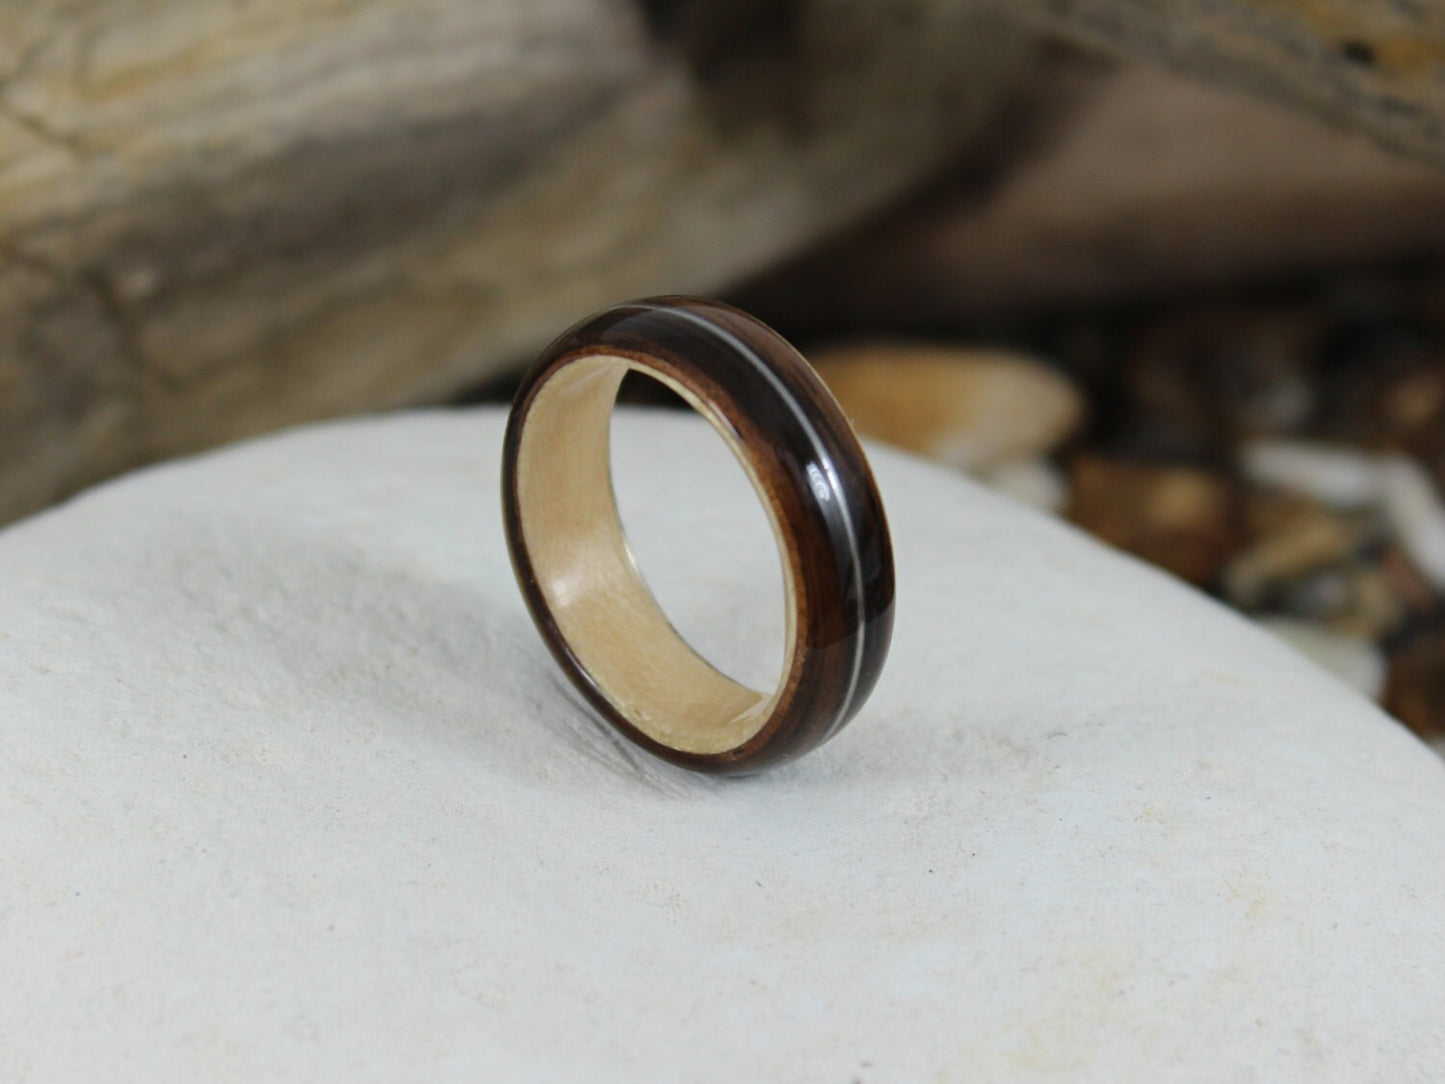 Ebony and Maple with a Guitar String Bent Wood Ring